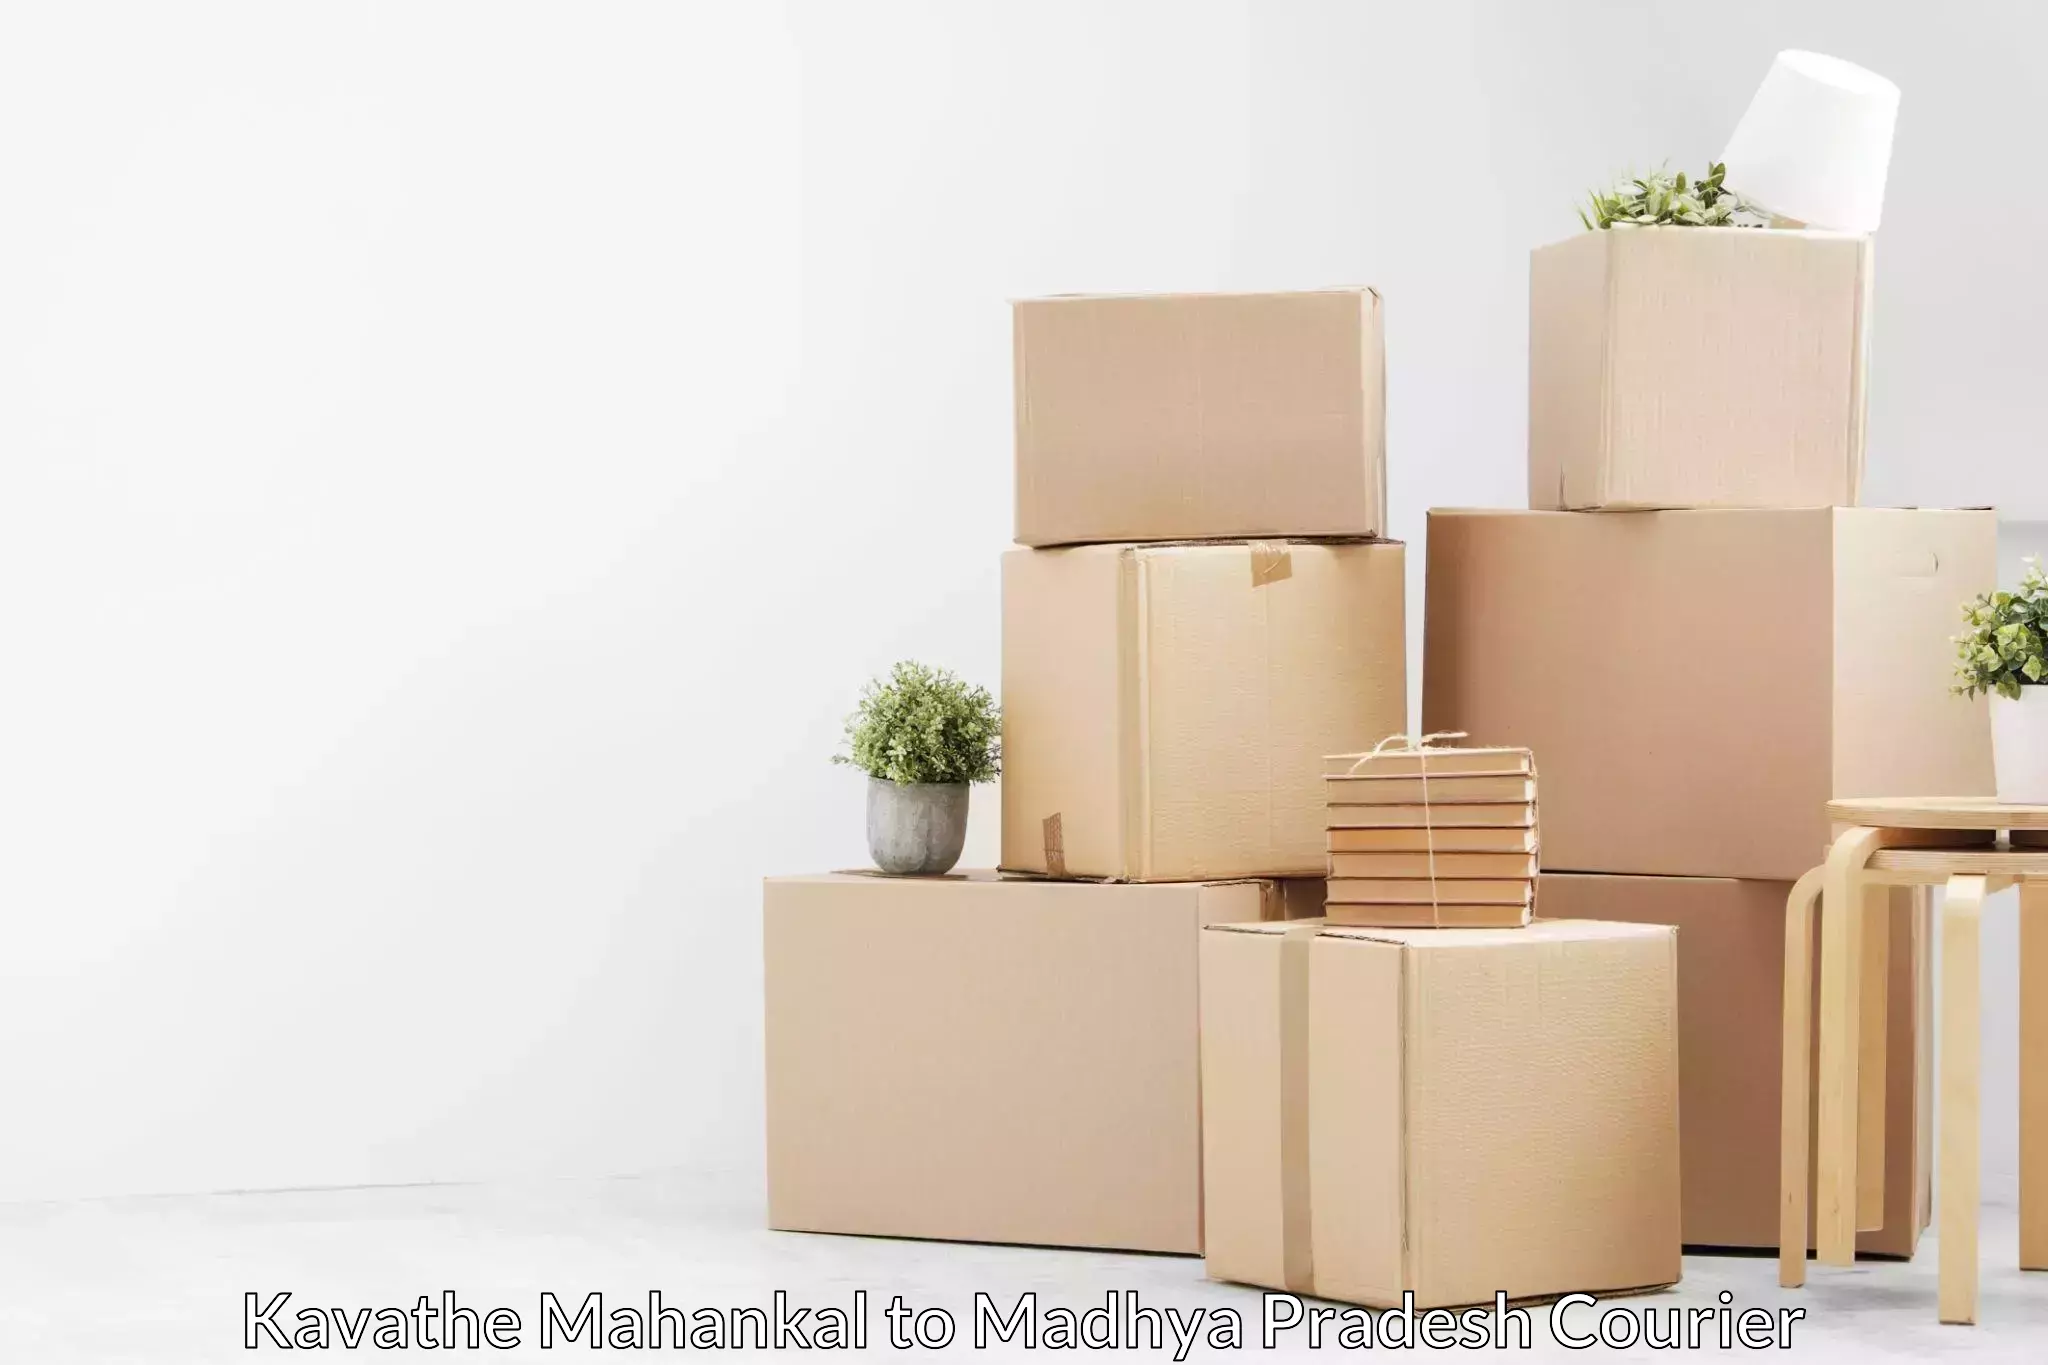 Cost-effective moving options Kavathe Mahankal to Bajag